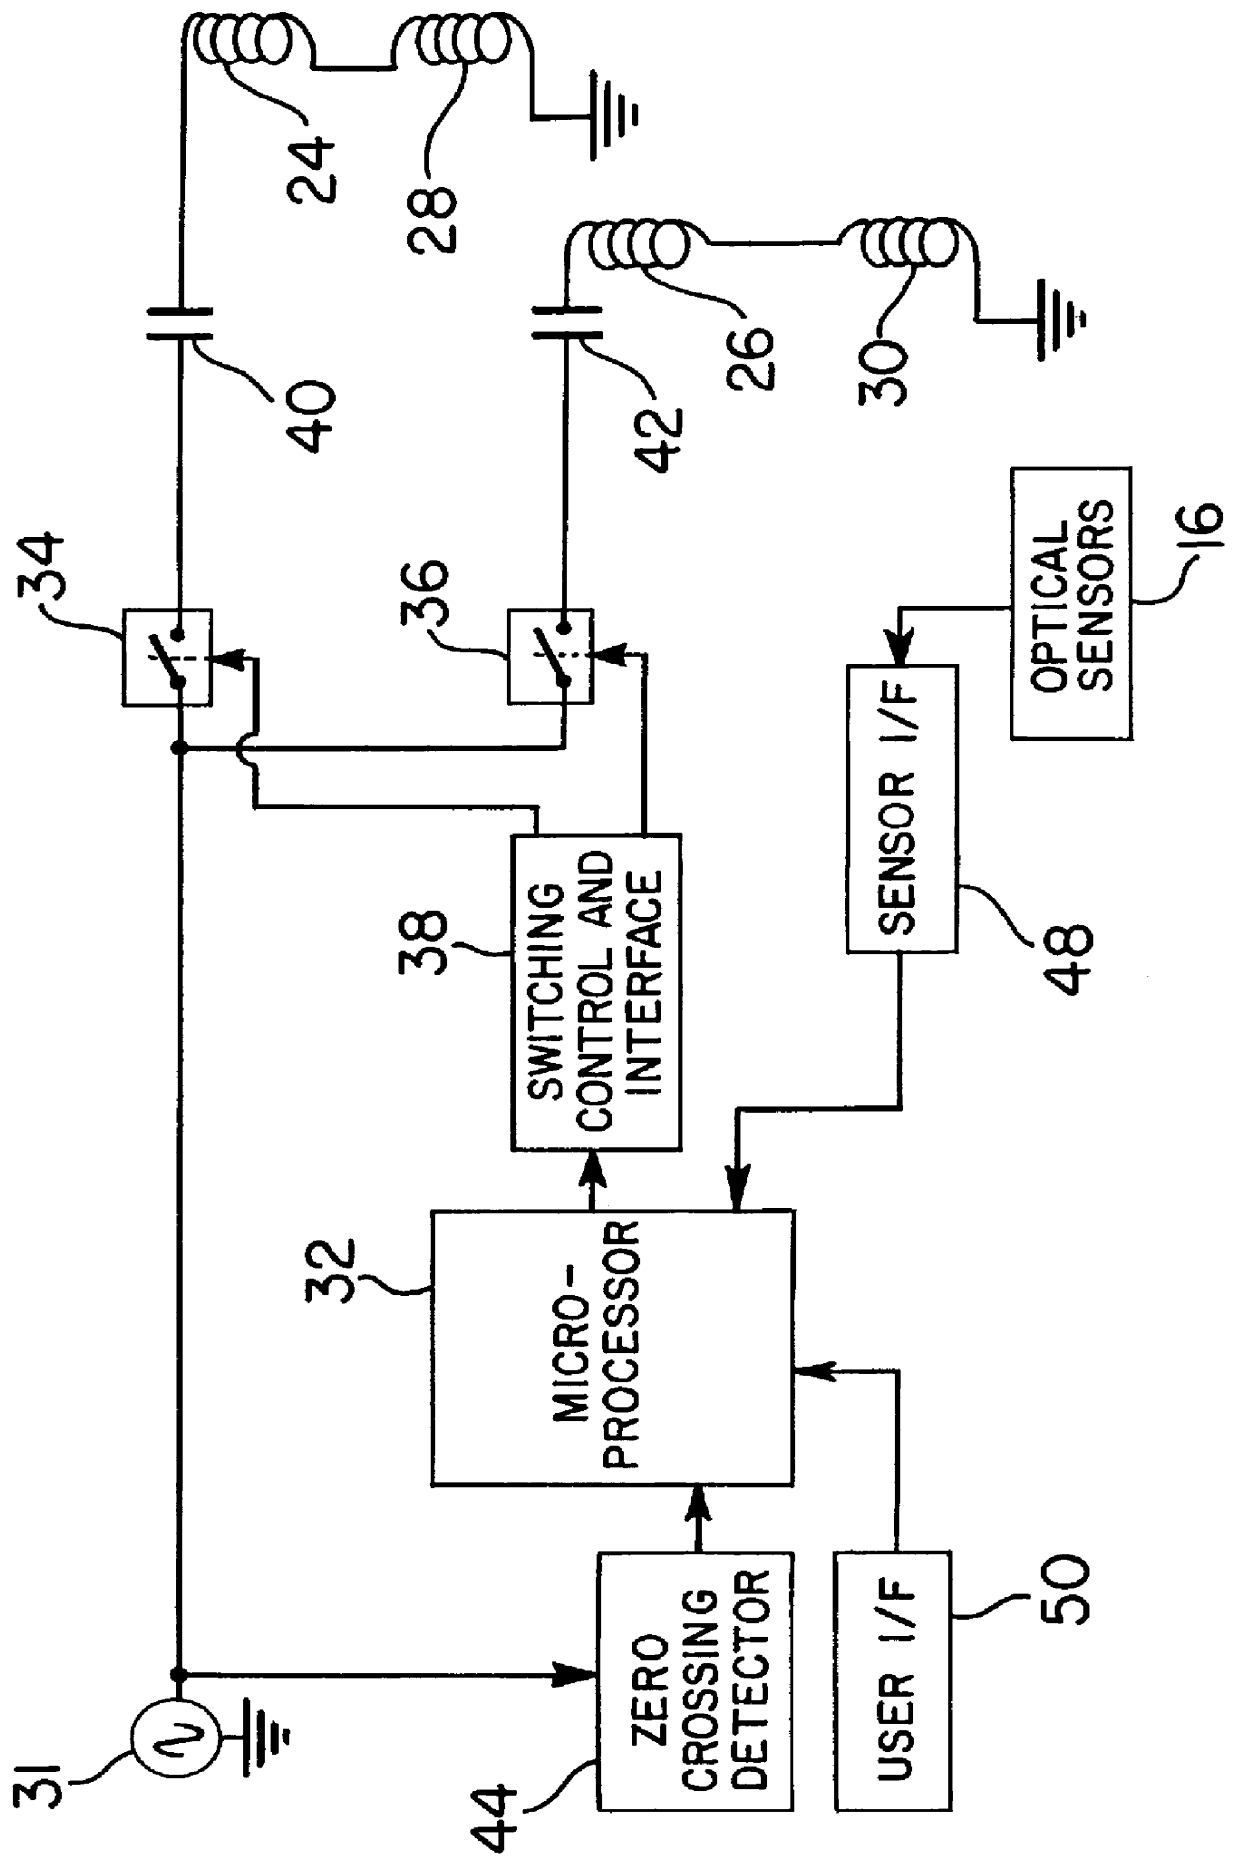 Energizing circuit for EAS marker deactivation device